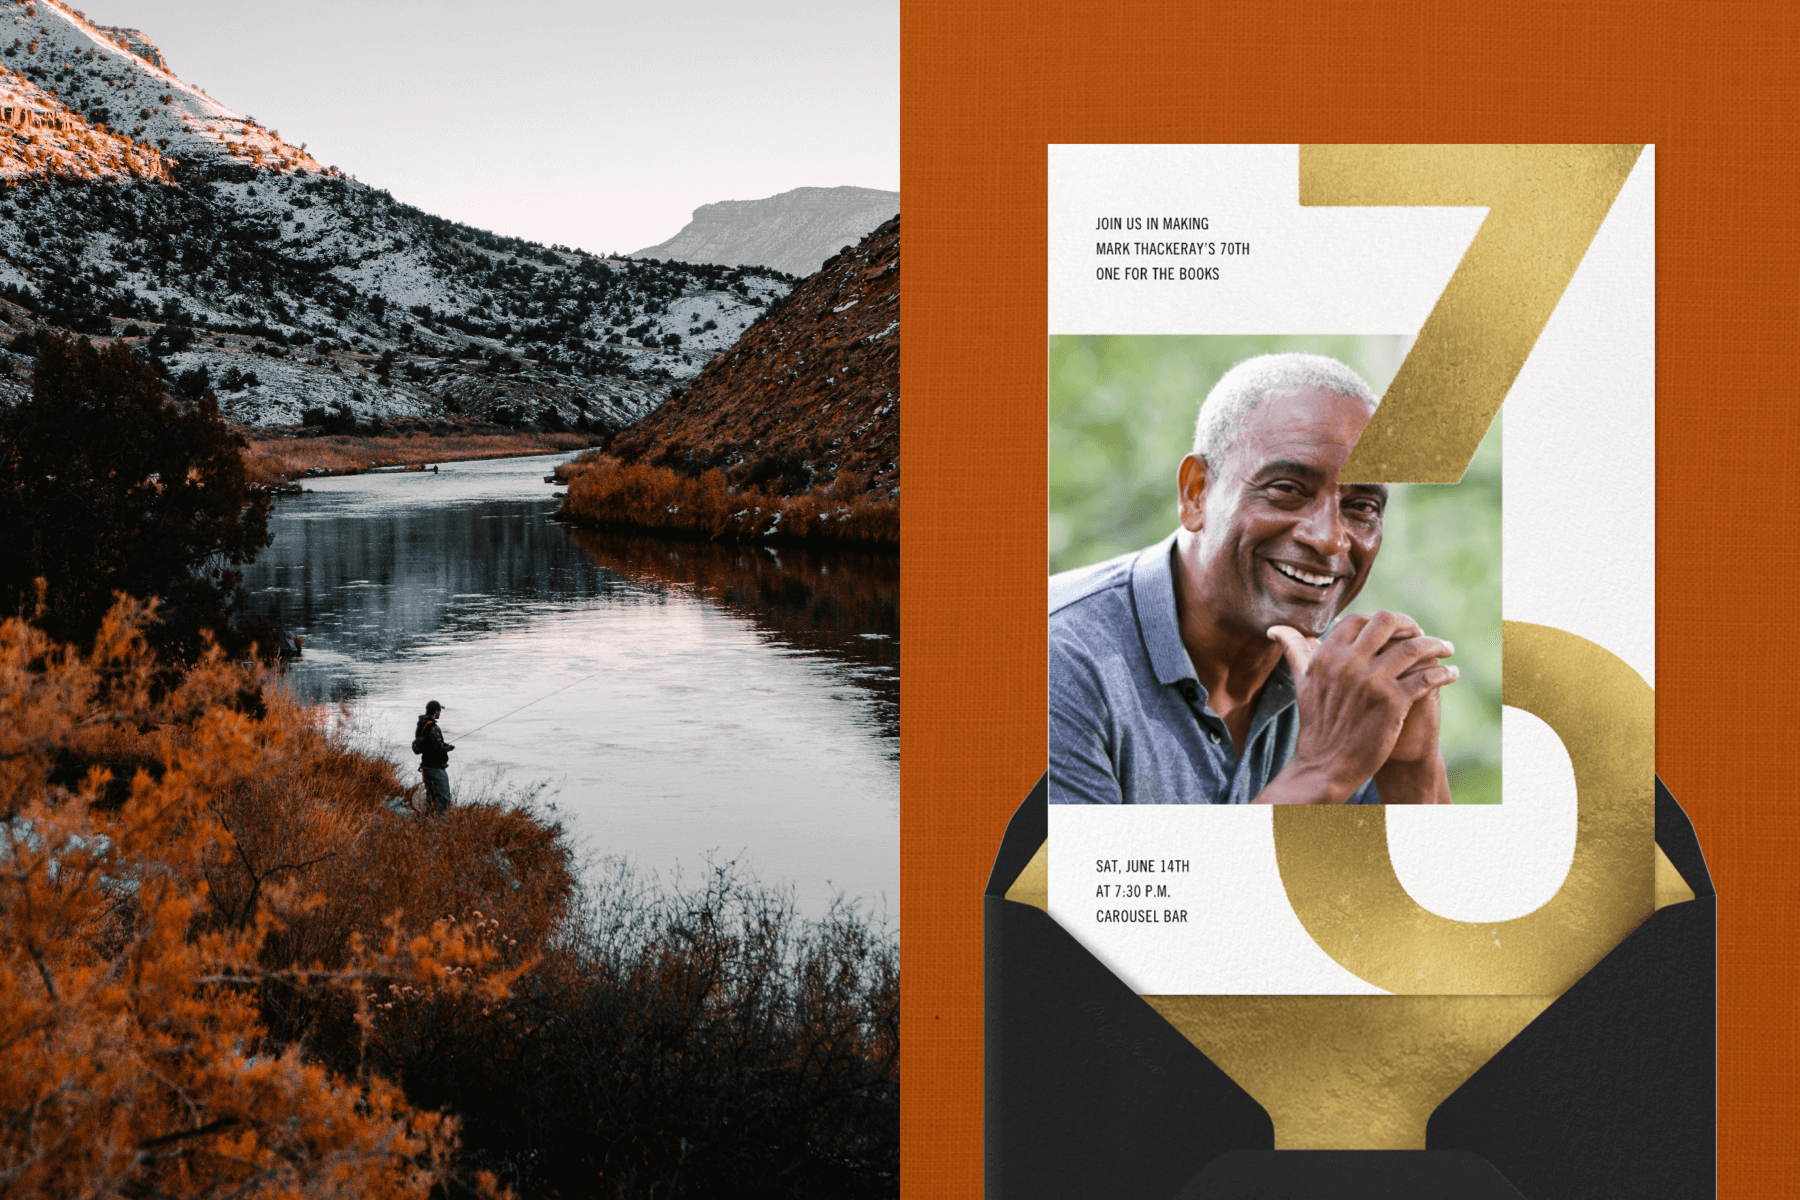 Left: snowy mountain lake scene with a person fishing in the distance. Right: 70th birthday invitation with a photo of a man and the number 70 in large gold foil